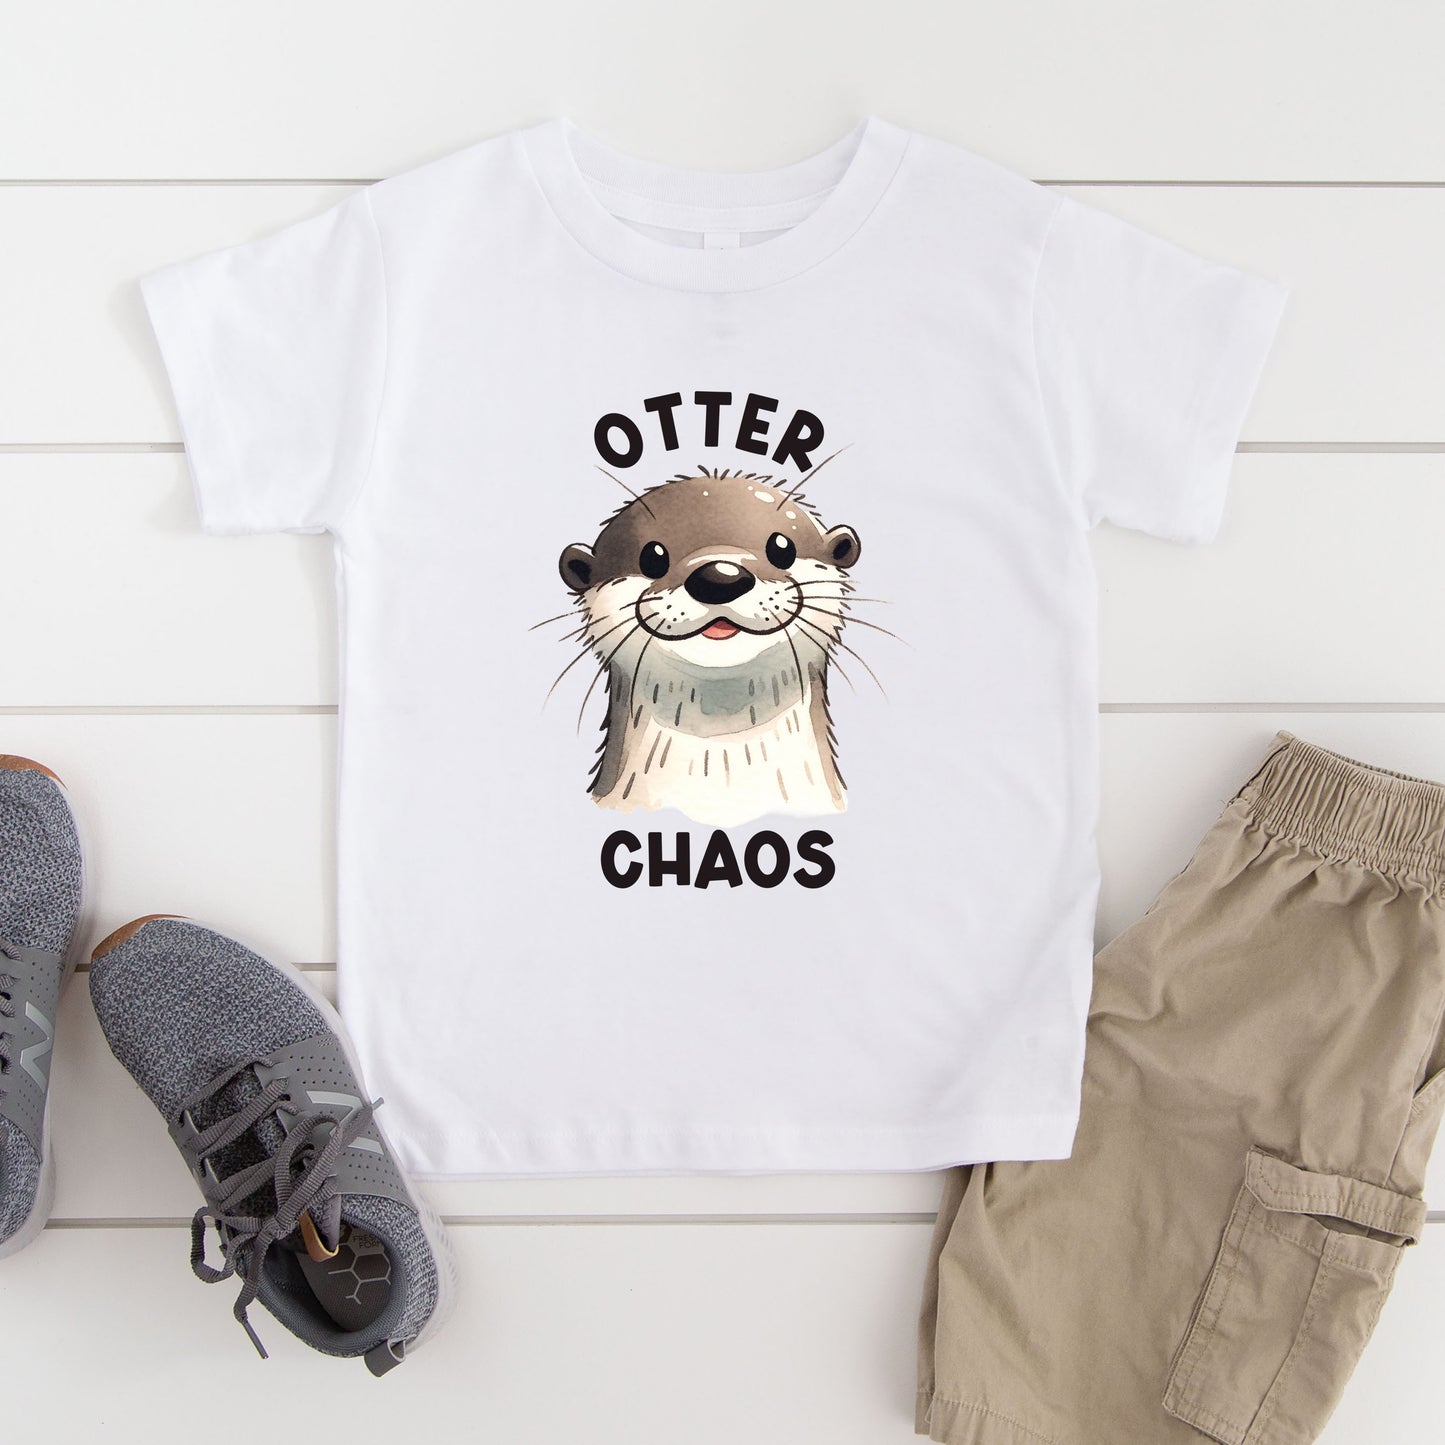 Otter Chaos | Youth Graphic Short Sleeve Tee